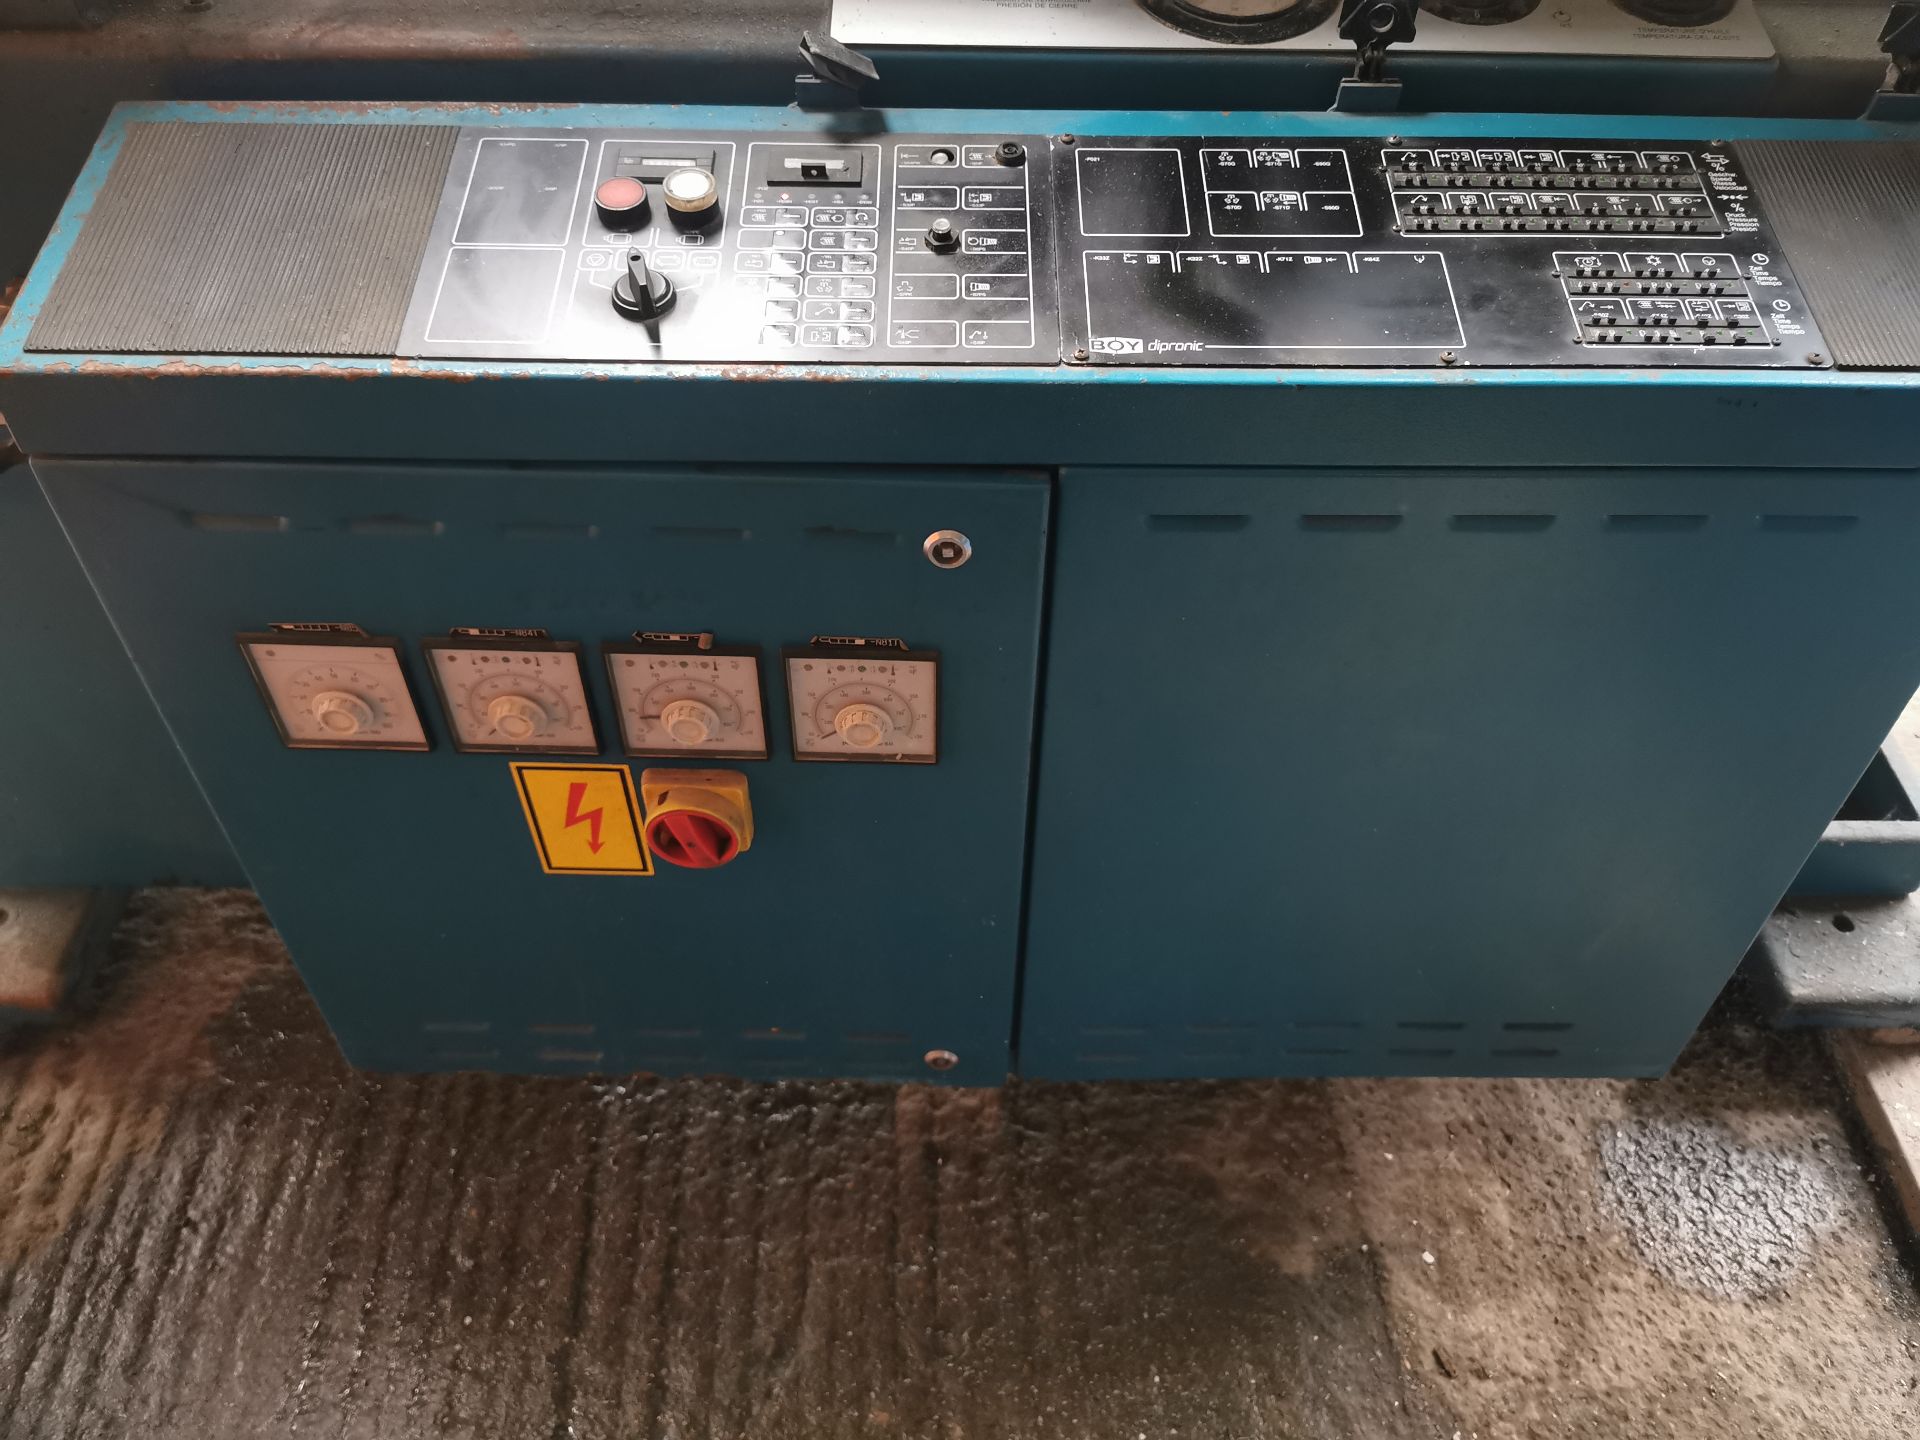 Boy 50T 2 Injection Moulding Machine - Image 13 of 16